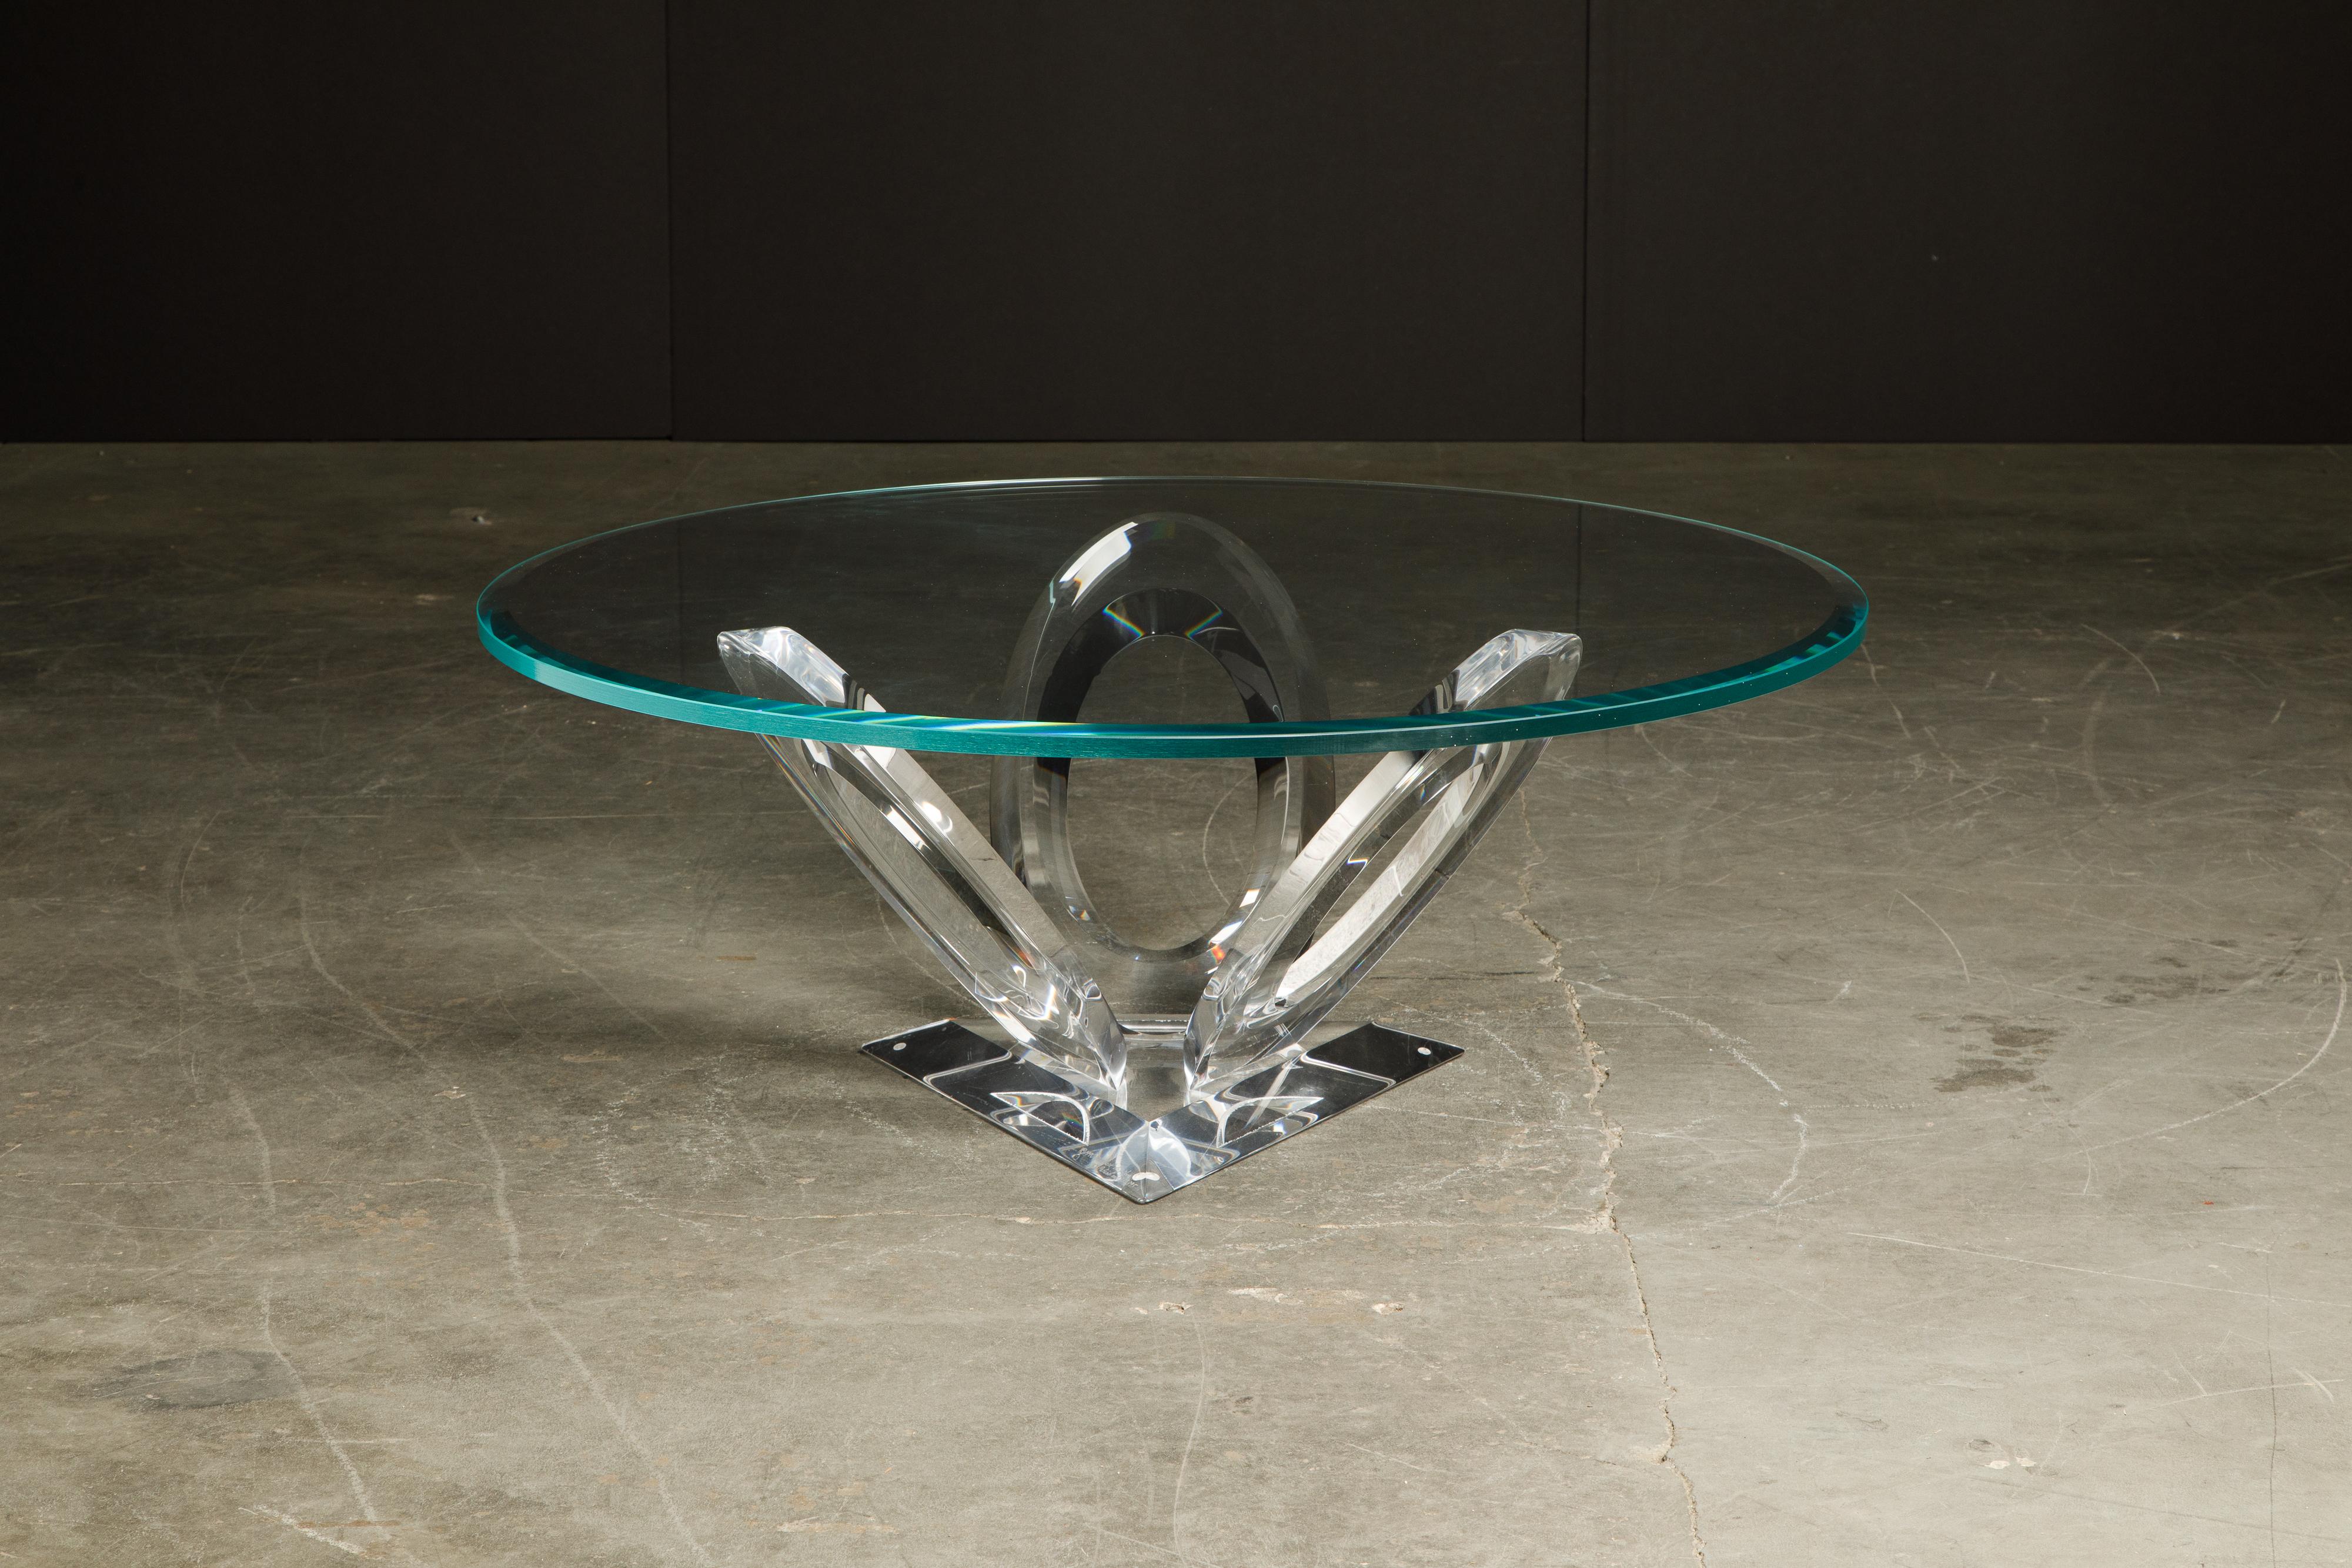 This mesmerizing sculptural coffee table was designed by Russian designer Mikhail Loznikov and was named 'Eclipse of Time'. Sculpted from lucite with a clear glass top, this exquisite piece is an eye-catcher for a designer interior or collector's